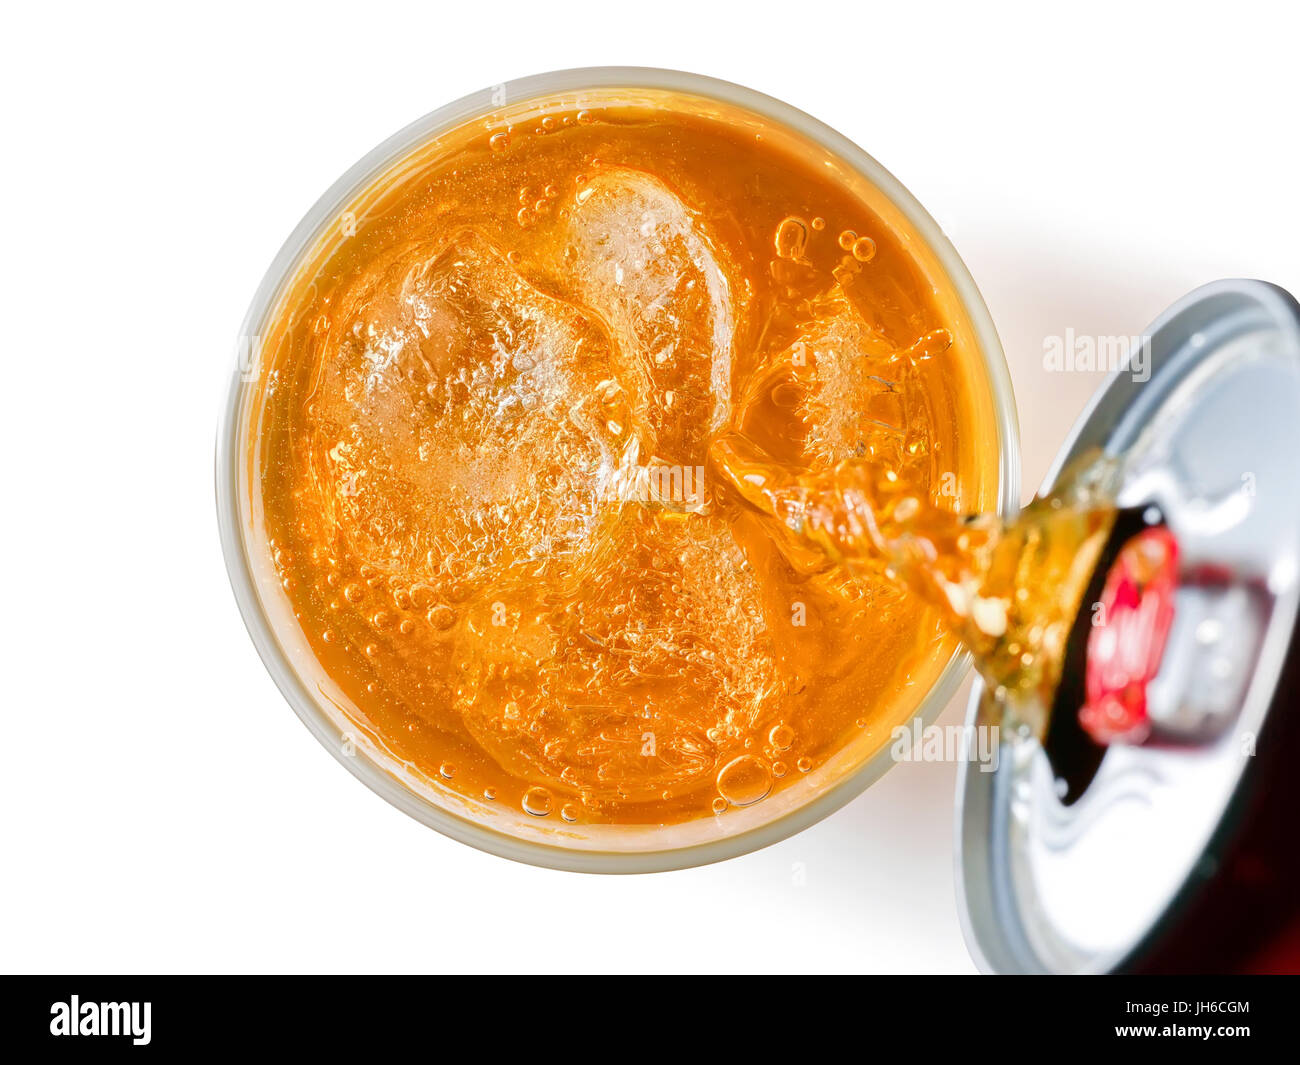 Orange soft drink liquid pouring from a can into a glass. Top view. Isolated on white, clipping path included Stock Photo